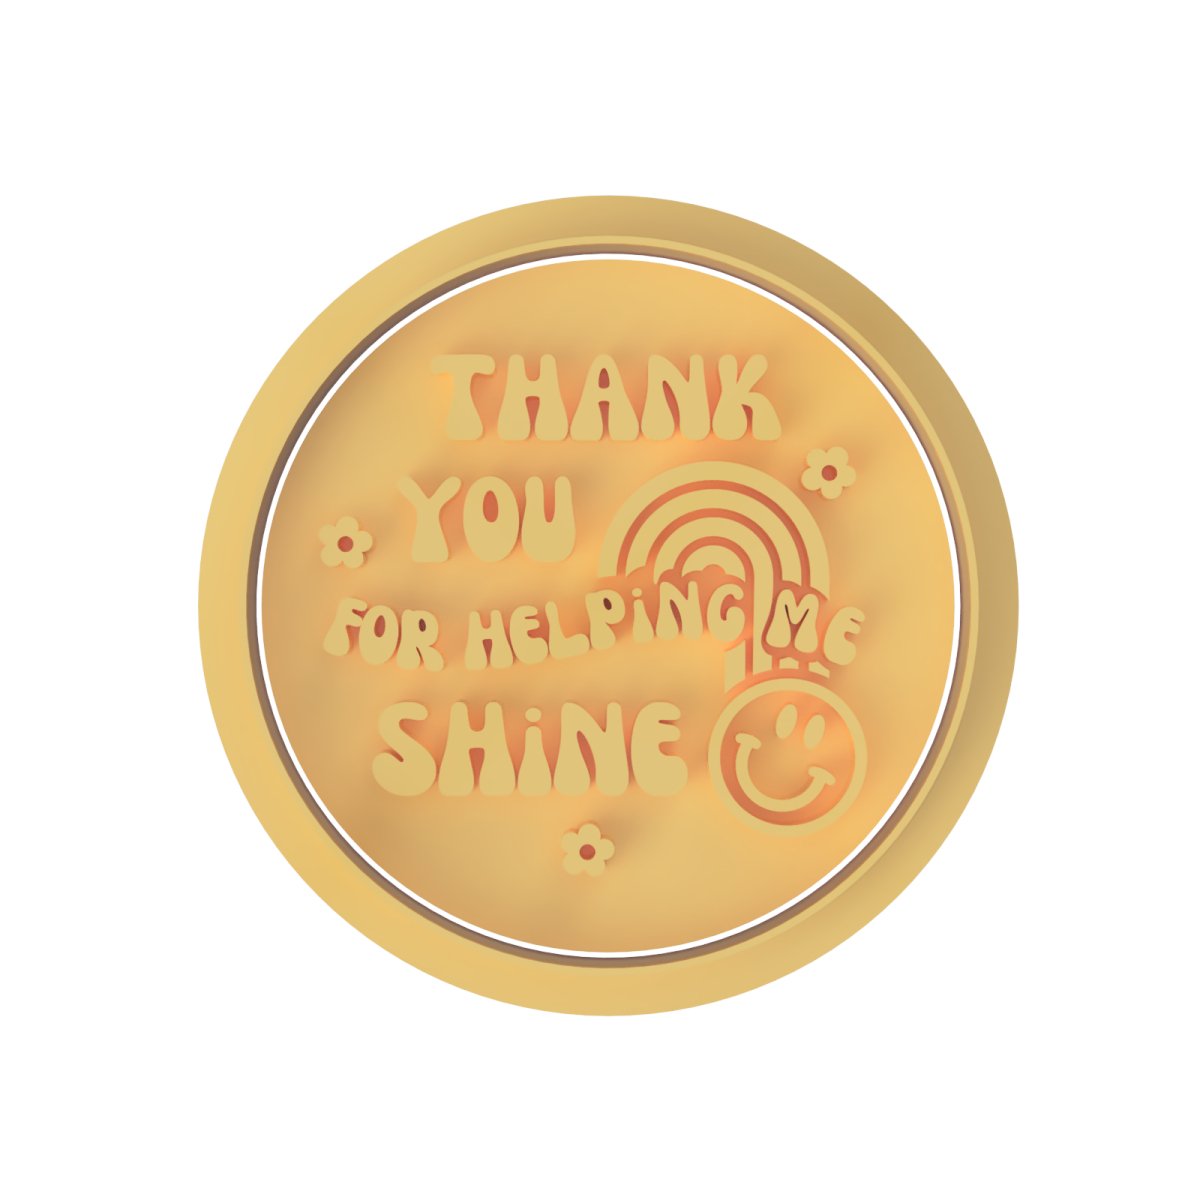 Groovy Thank you for Helping me shine stamp - Chickadee